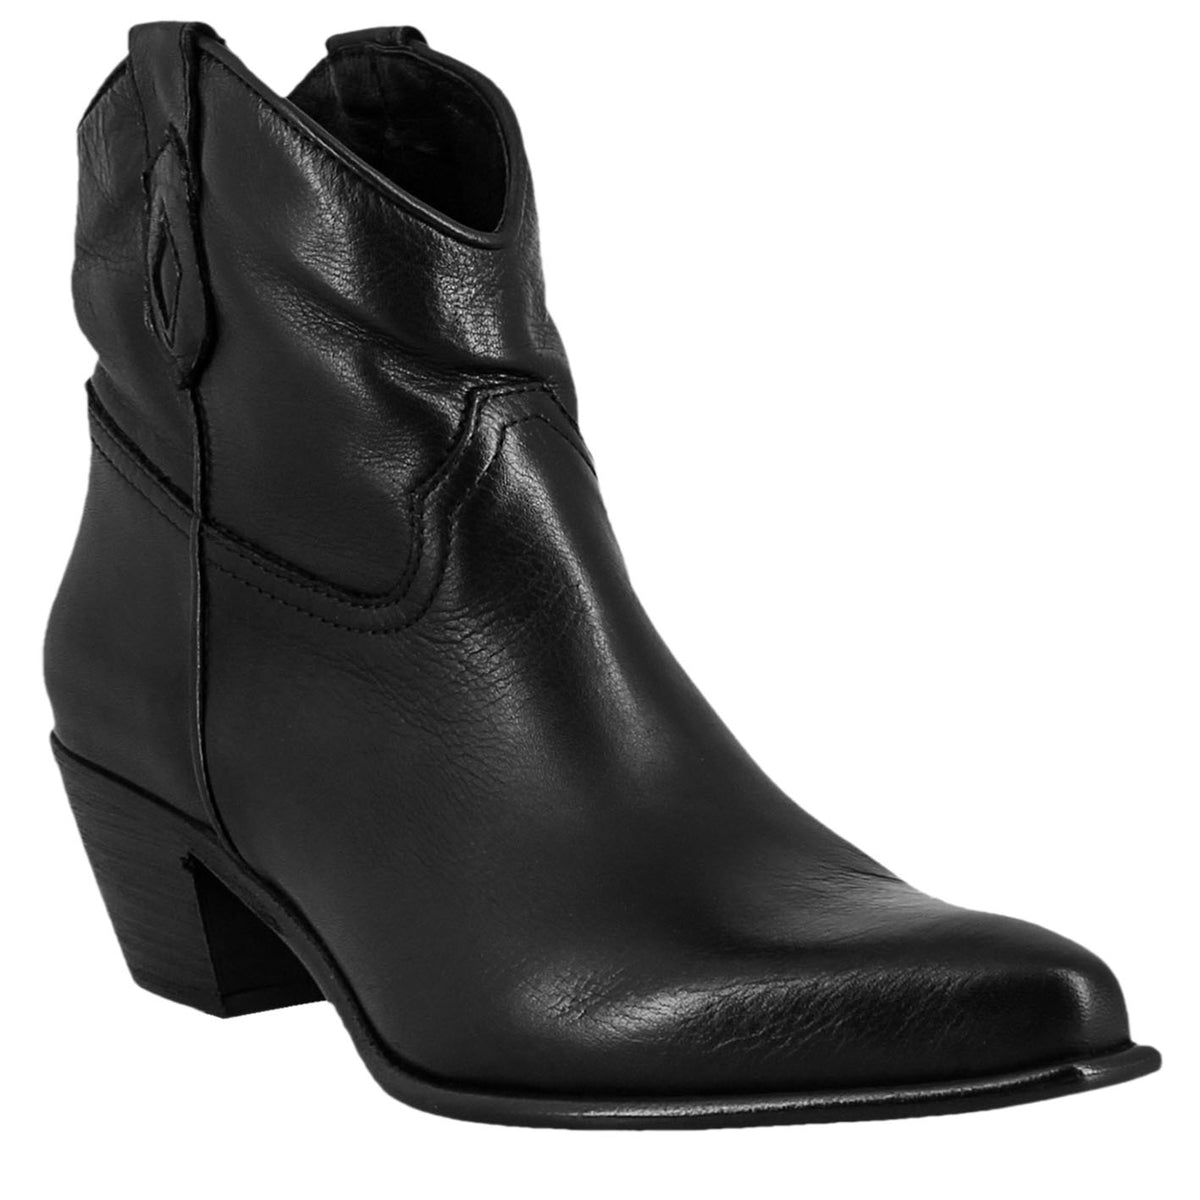 Women's low Texan boots unlined in black vintage leather